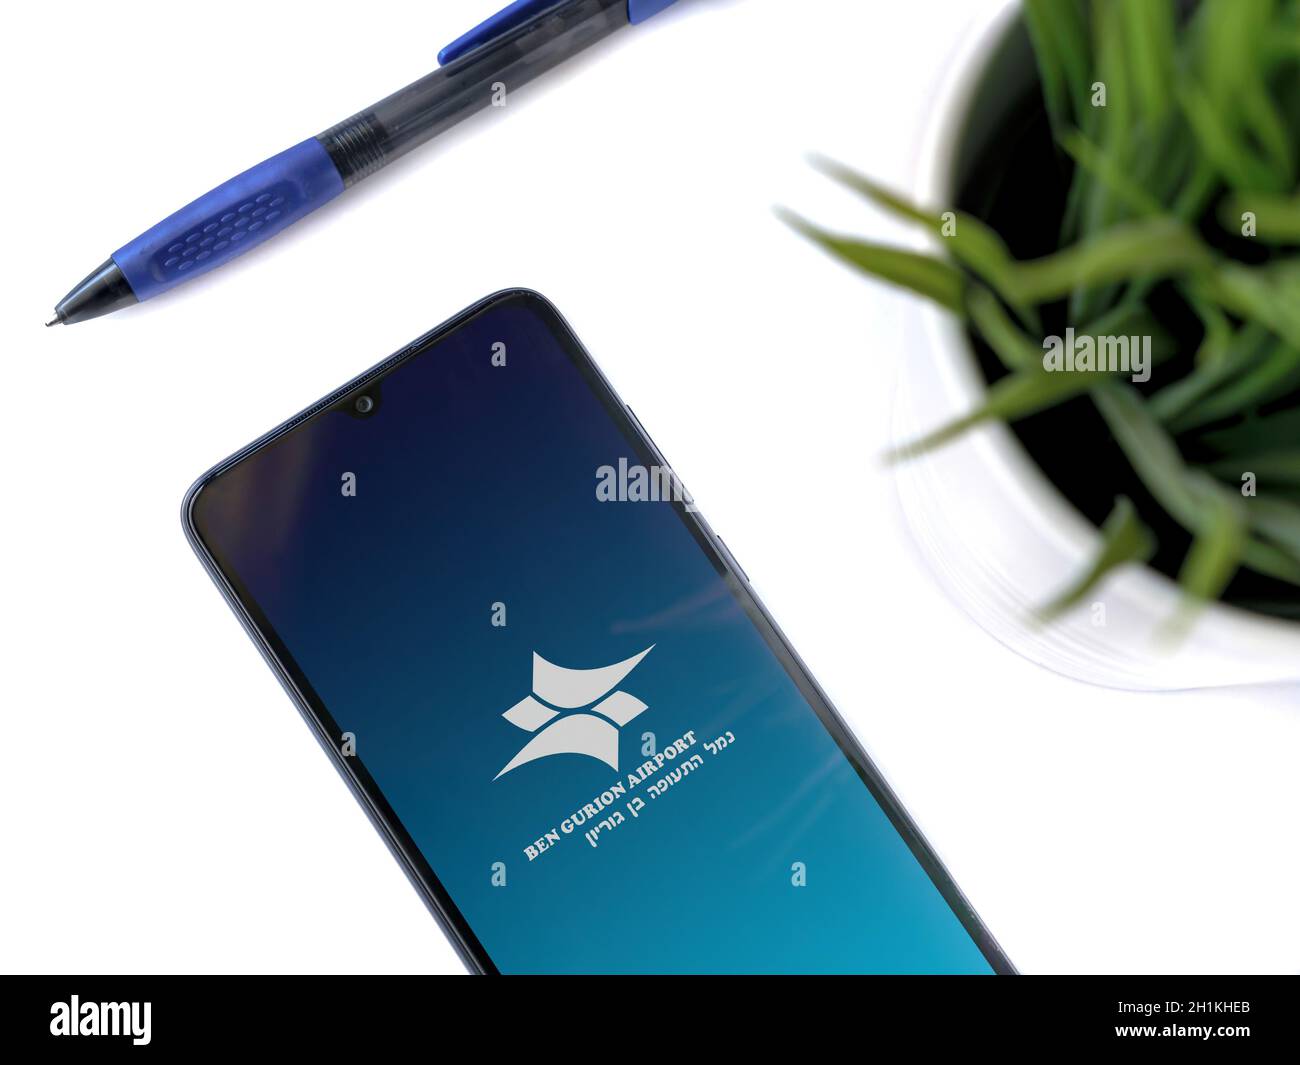 Lod, Israel - July 8, 2020: Modern minimalist office workspace with black mobile smartphone with Ben Gurion Airport app launch screen with logo on whi Stock Photo